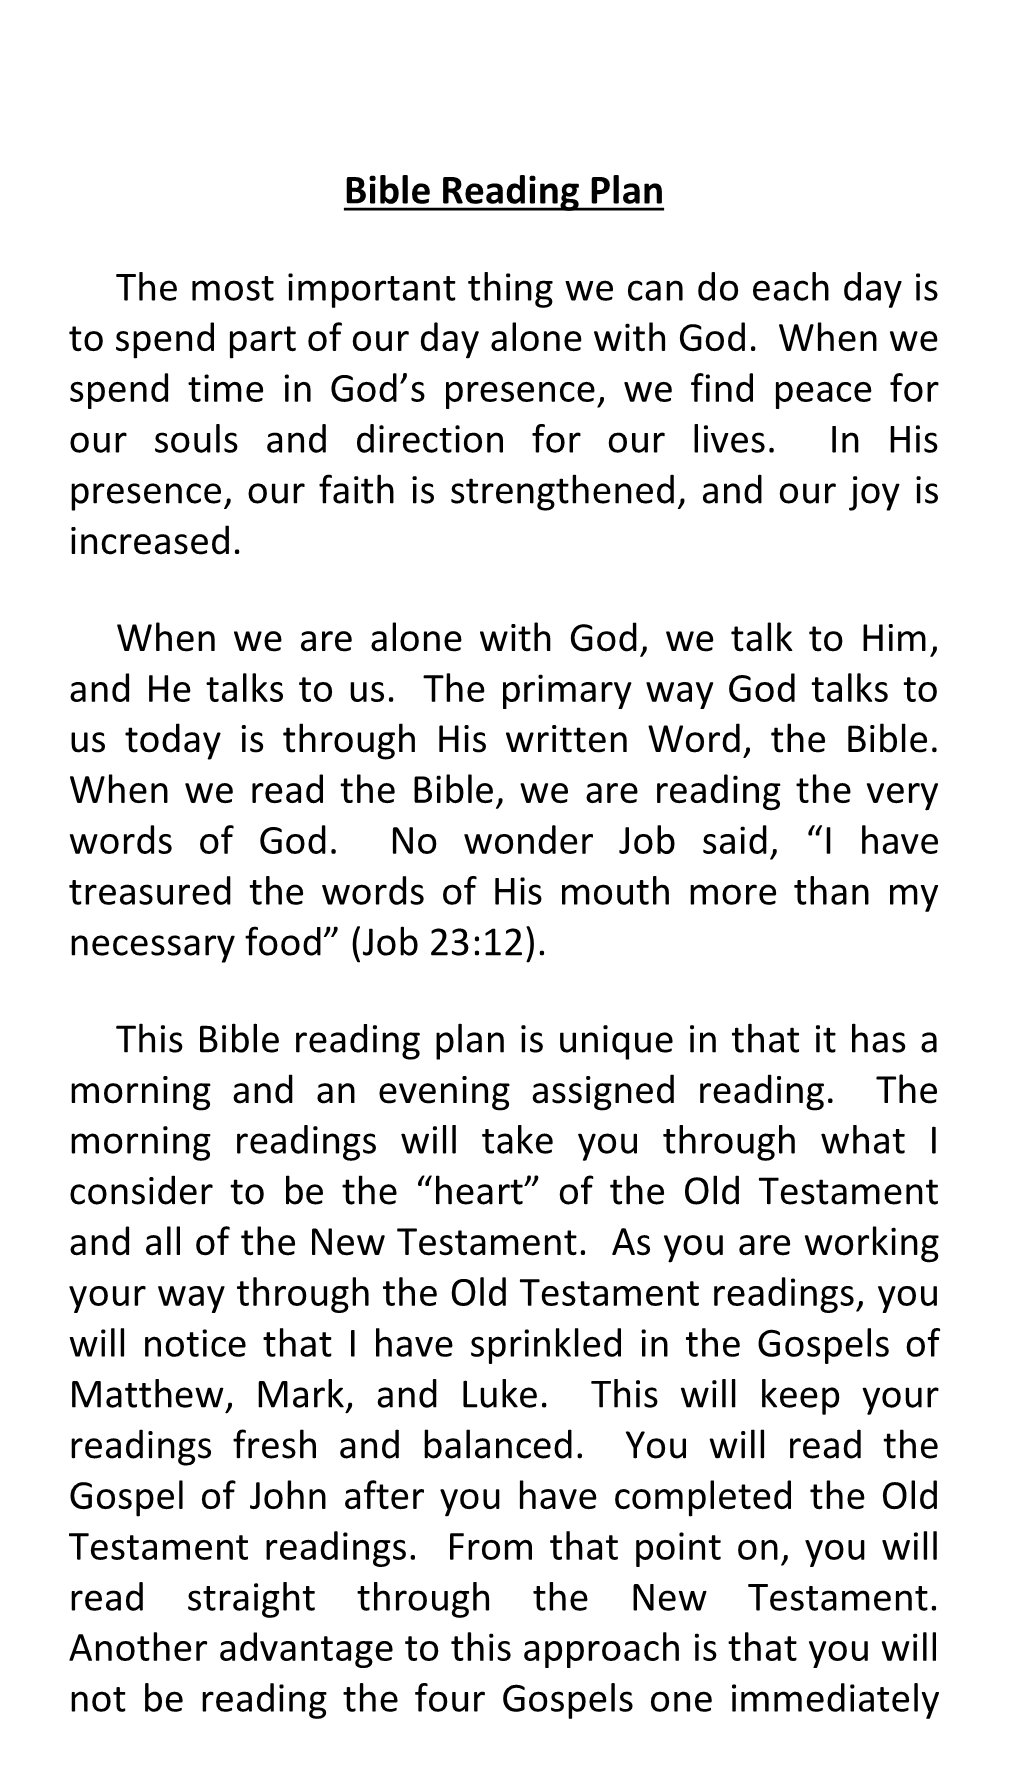 Bible Reading Plan the Most Important Thing We Can Do Each Day